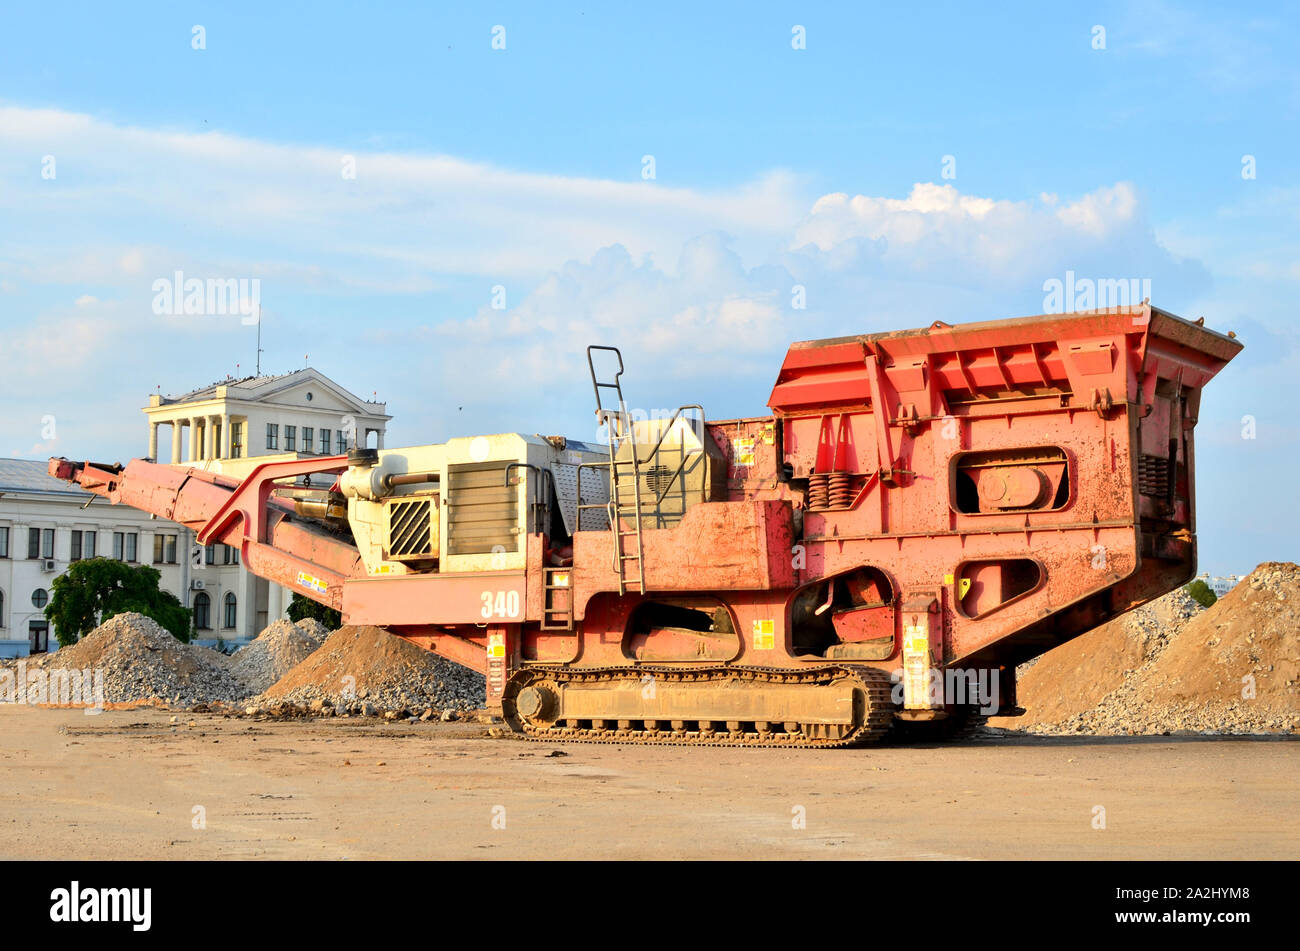 https://c8.alamy.com/comp/2A2HYM8/mobile-stone-crusher-machine-by-the-construction-site-or-mining-quarry-for-crushing-old-concrete-slabs-into-gravel-and-subsequent-cement-production-2A2HYM8.jpg